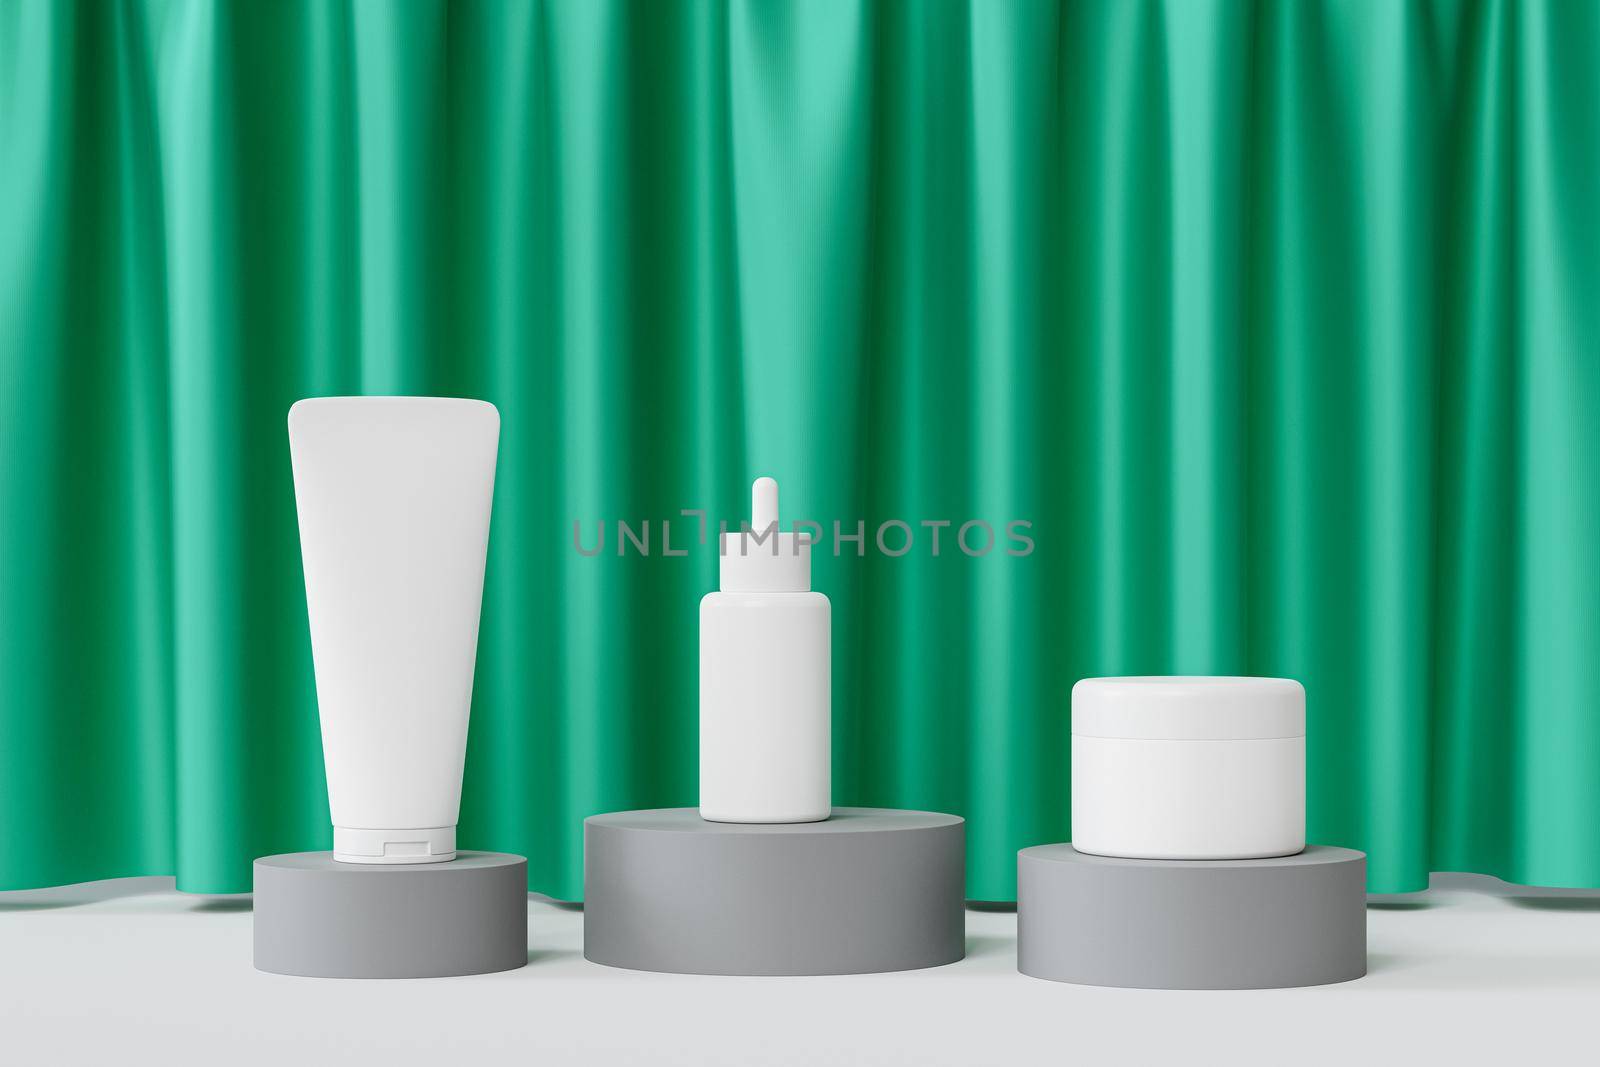 Mockup dropper bottle, lotion tube and cream jar for cosmetics products or advertising on gray podiums with green curtains, 3d illustration render by Frostroomhead